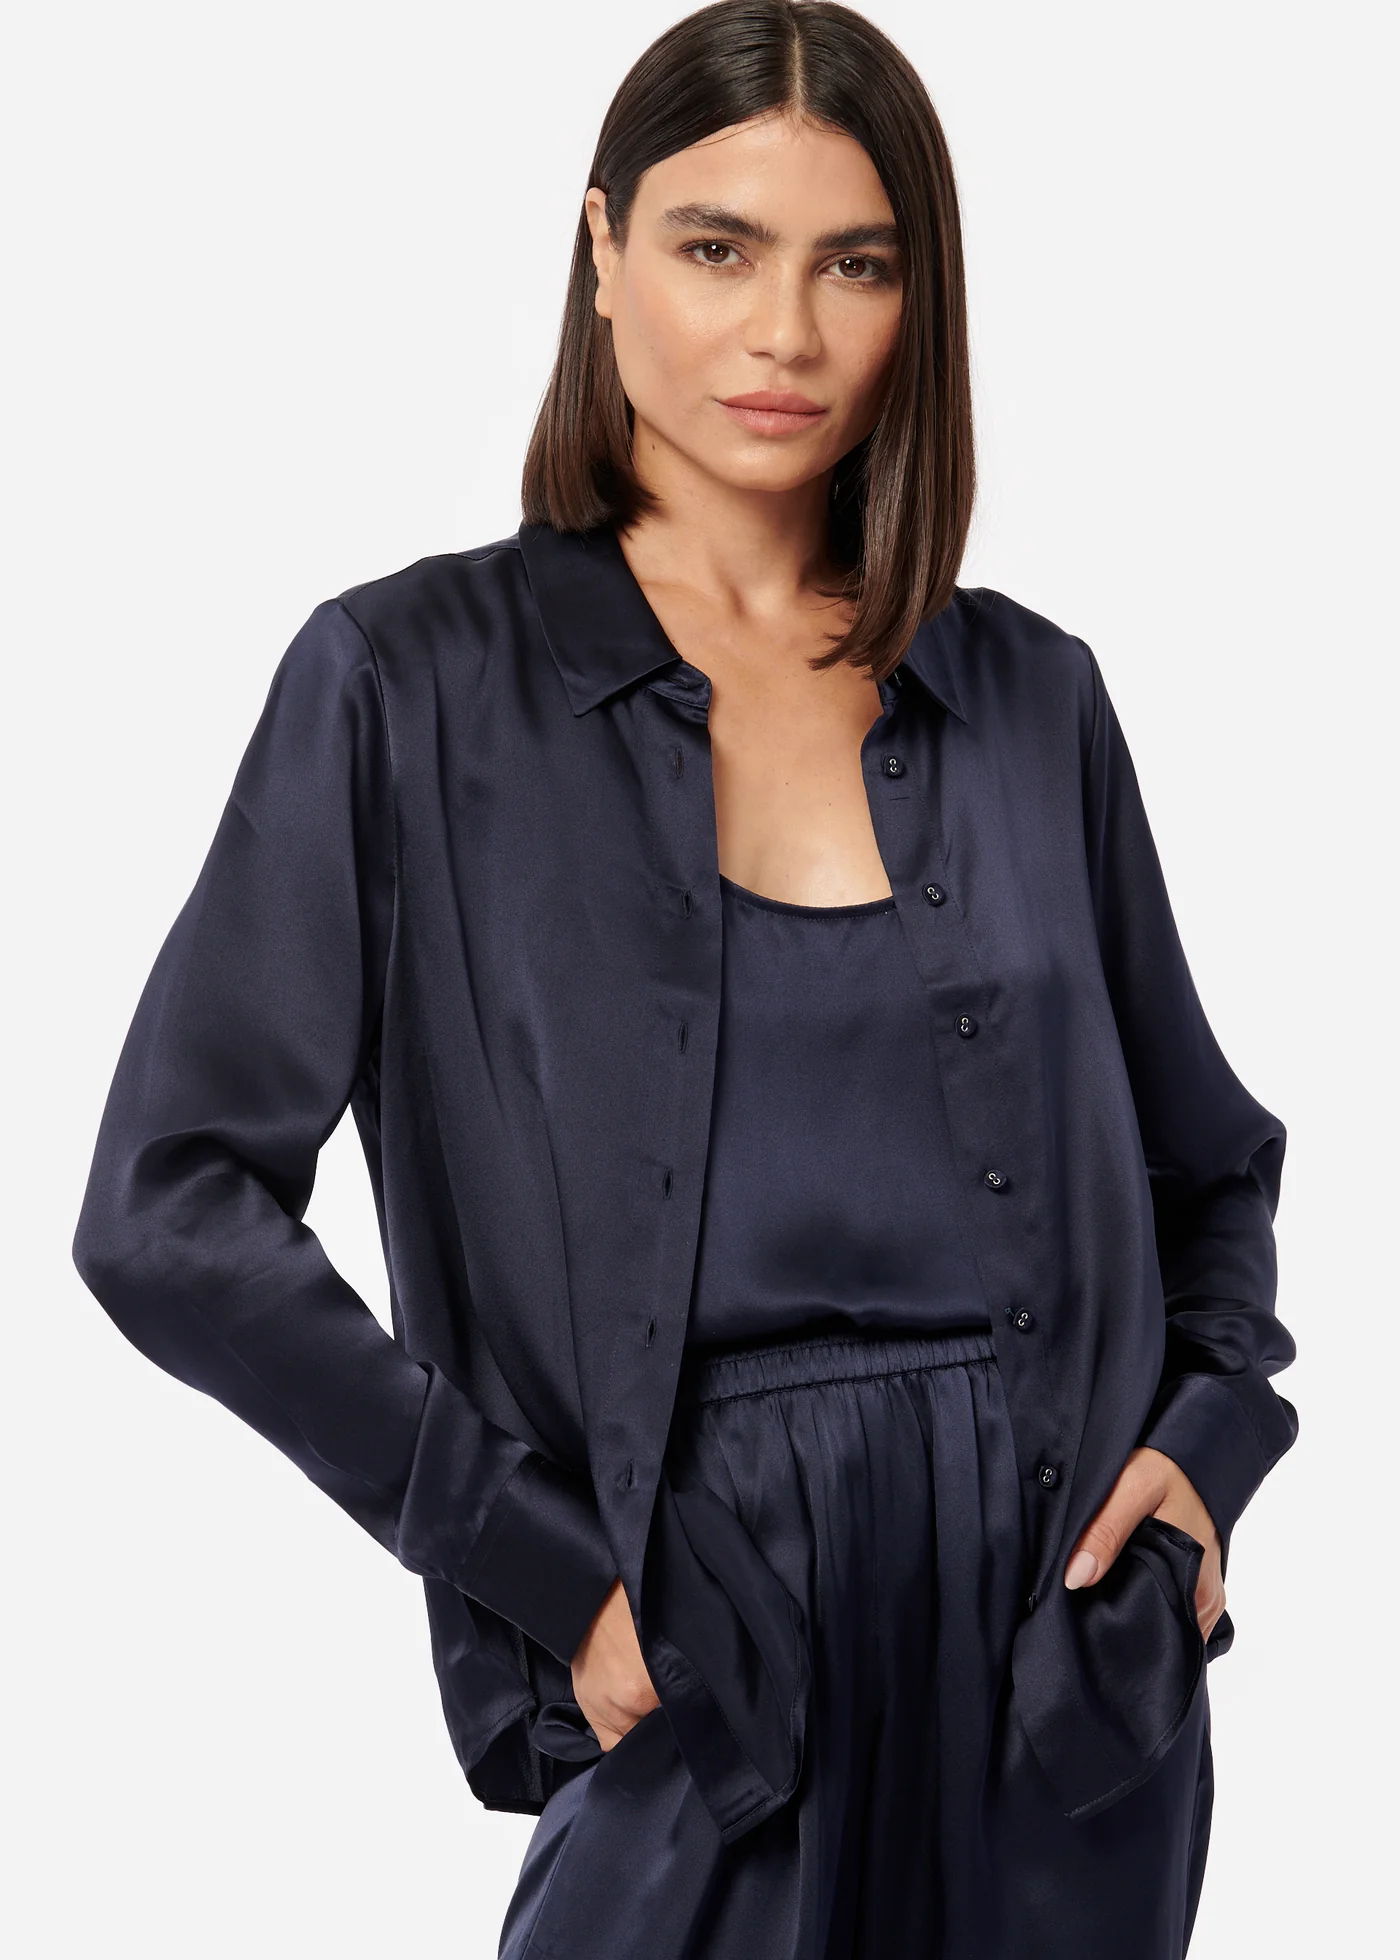 CROSBY BLOUSE IN NAVY - Romi Boutique